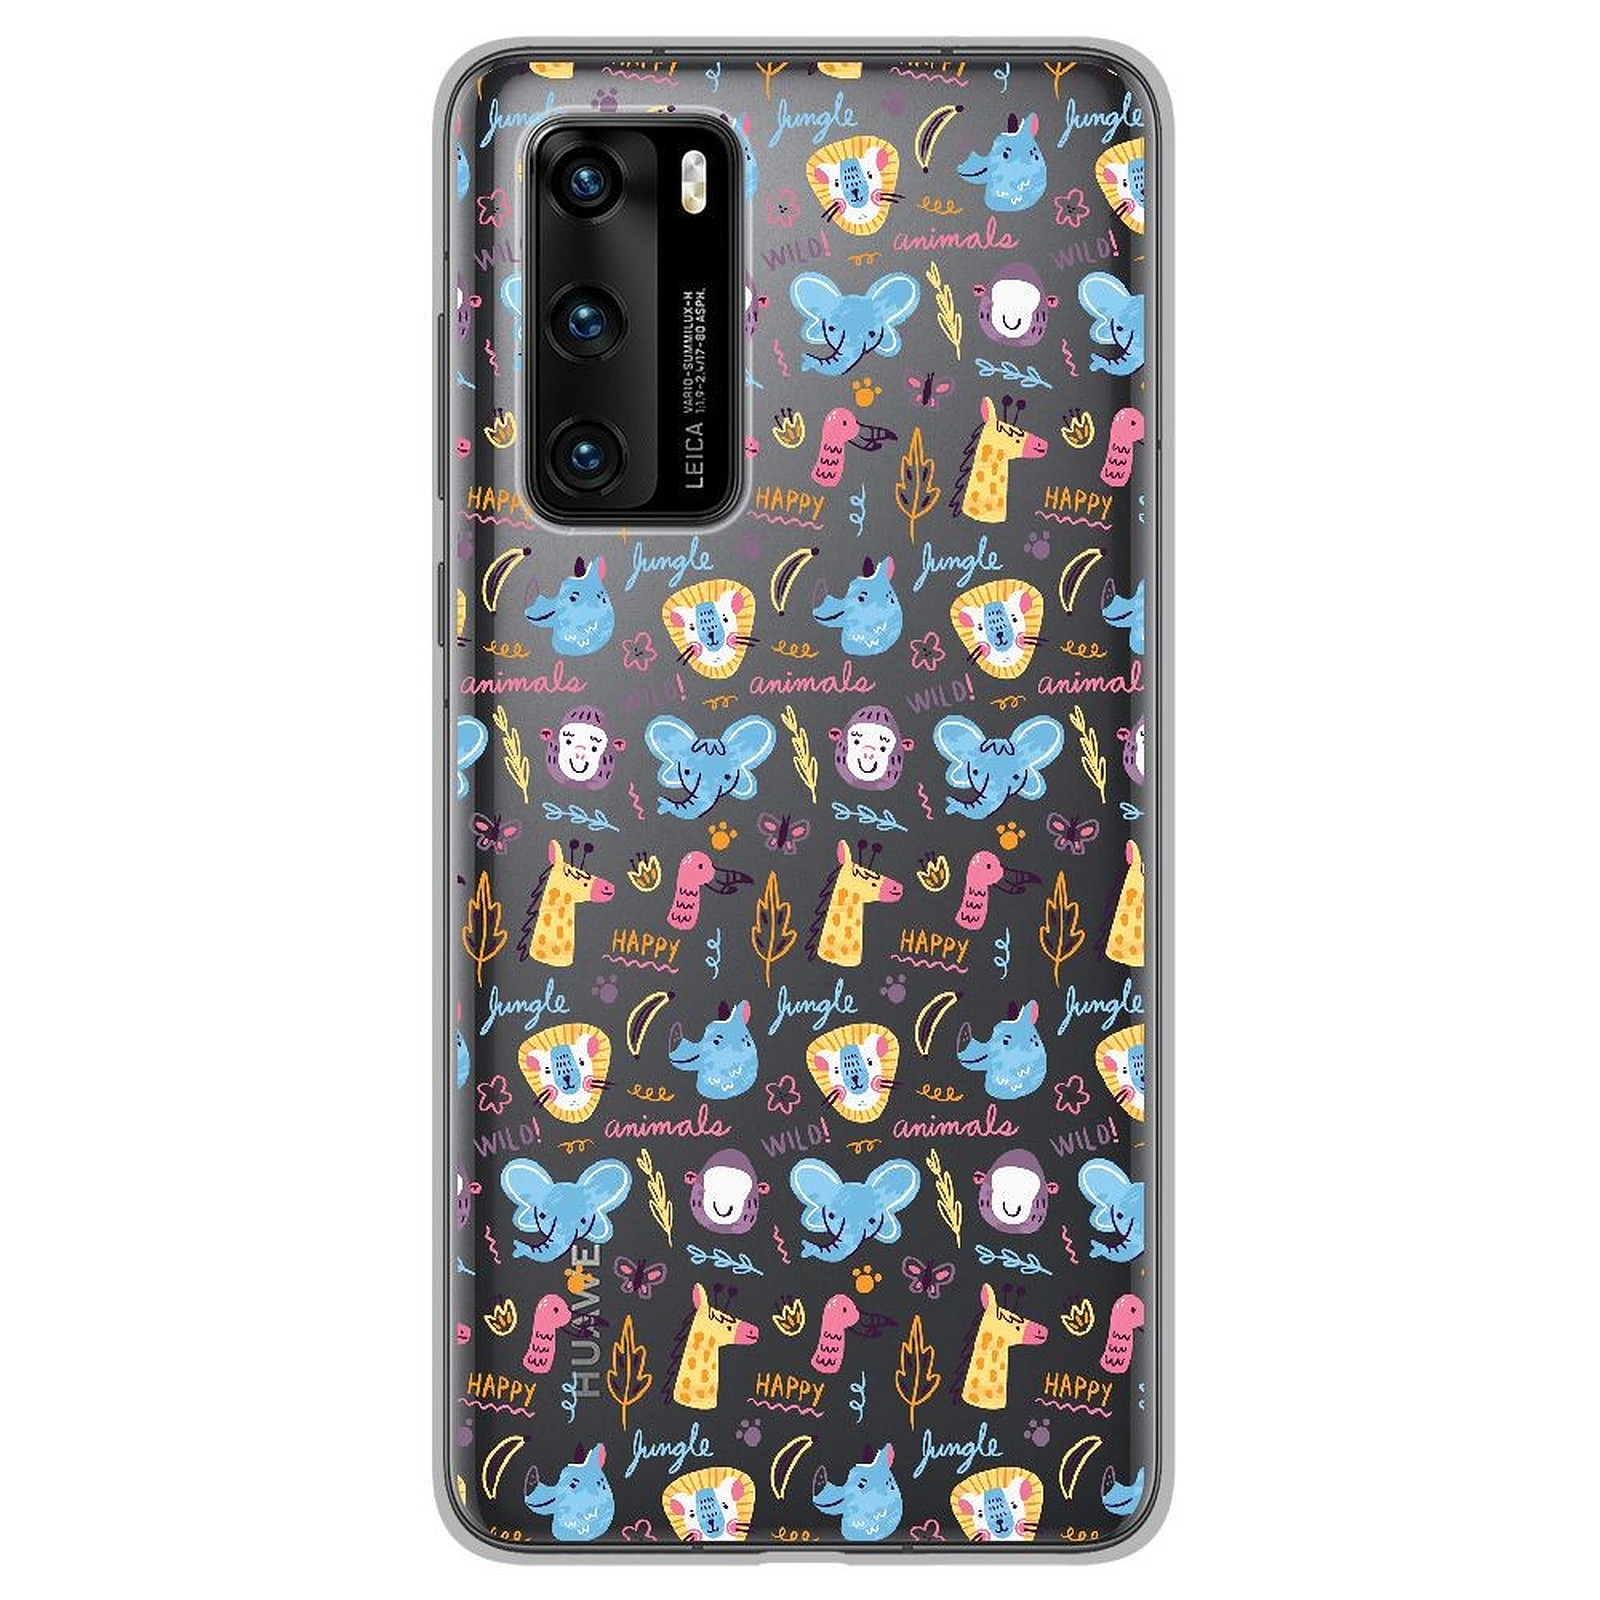 1001 Coques Coque silicone gel Huawei P40 motif Happy animals - Coque telephone 1001Coques